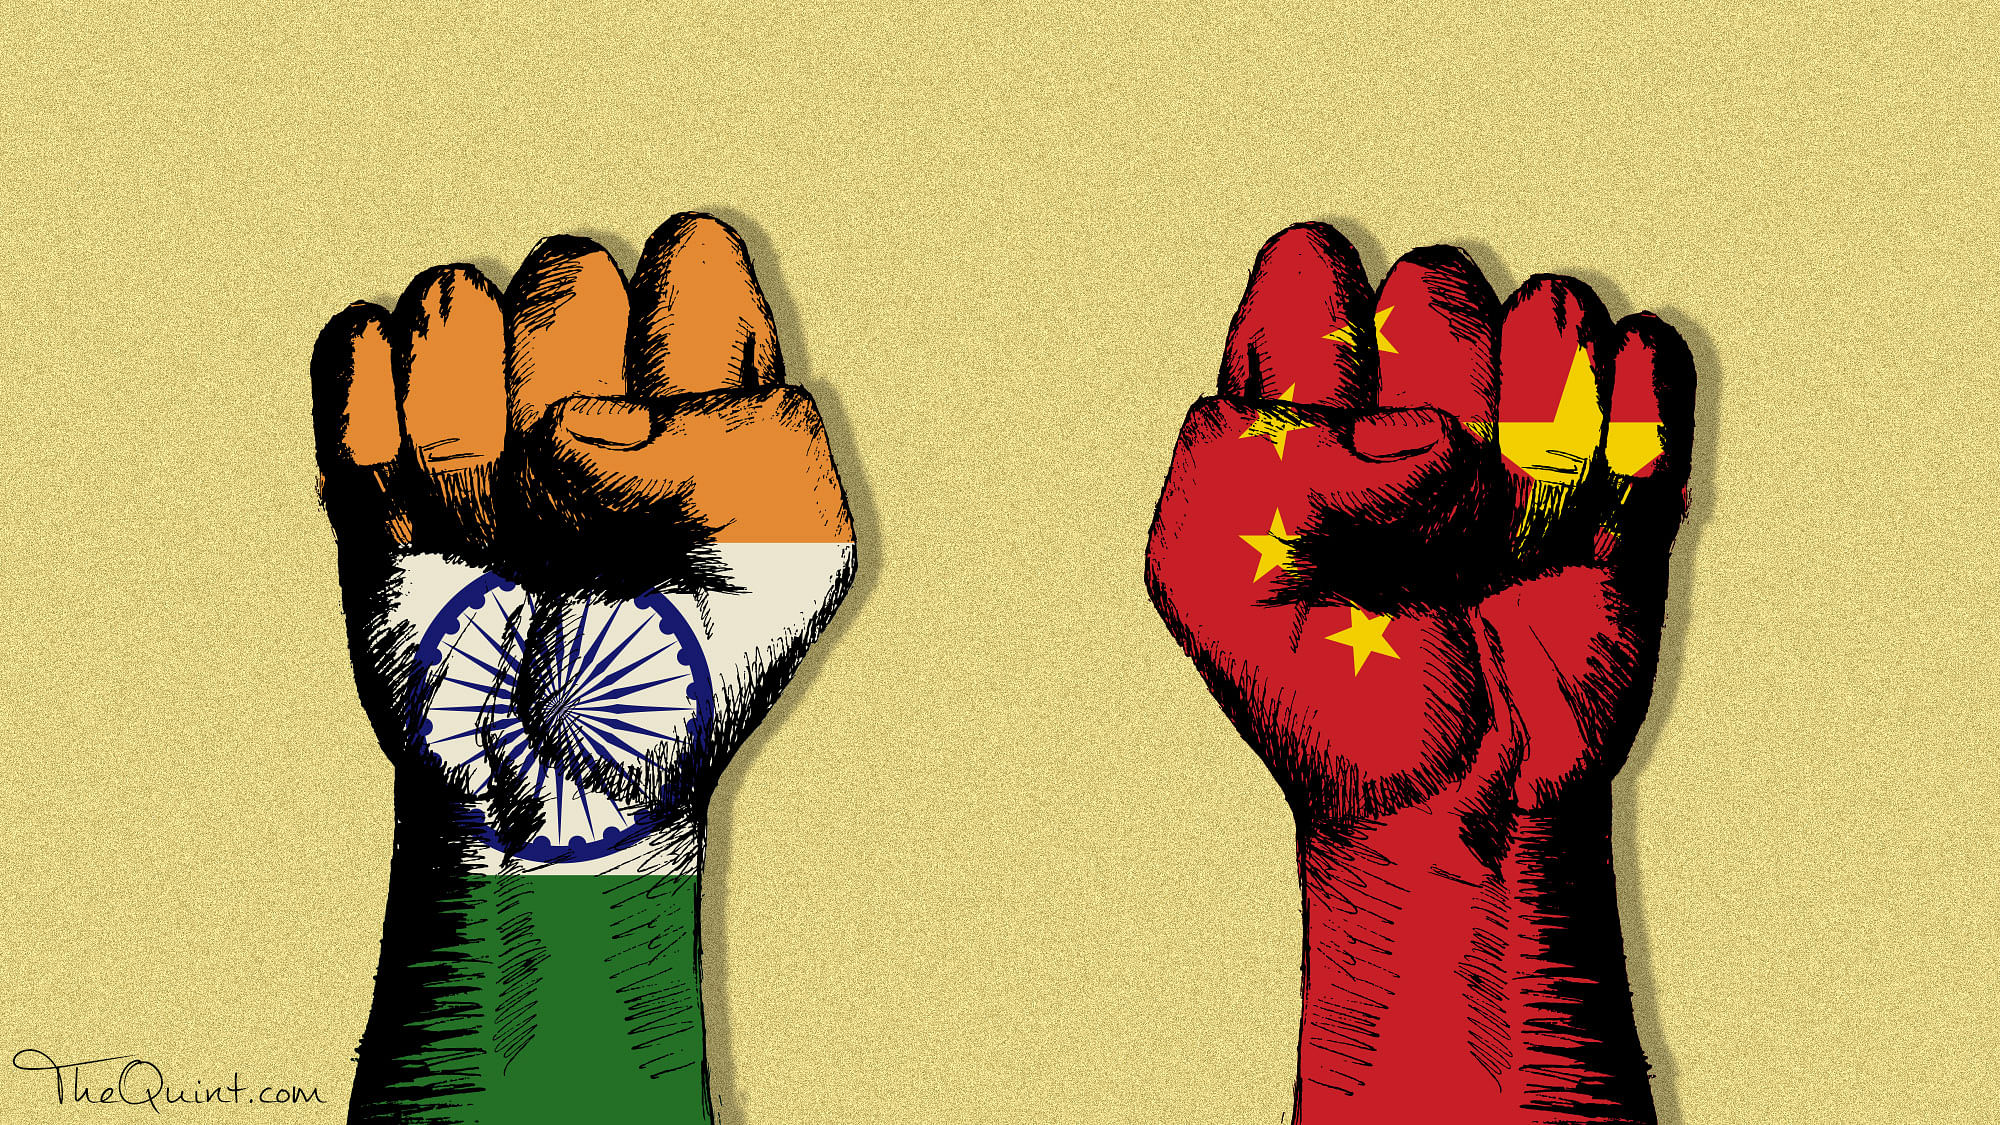 India’s loss of Maldives can intensify Indo-China tensions.&nbsp;